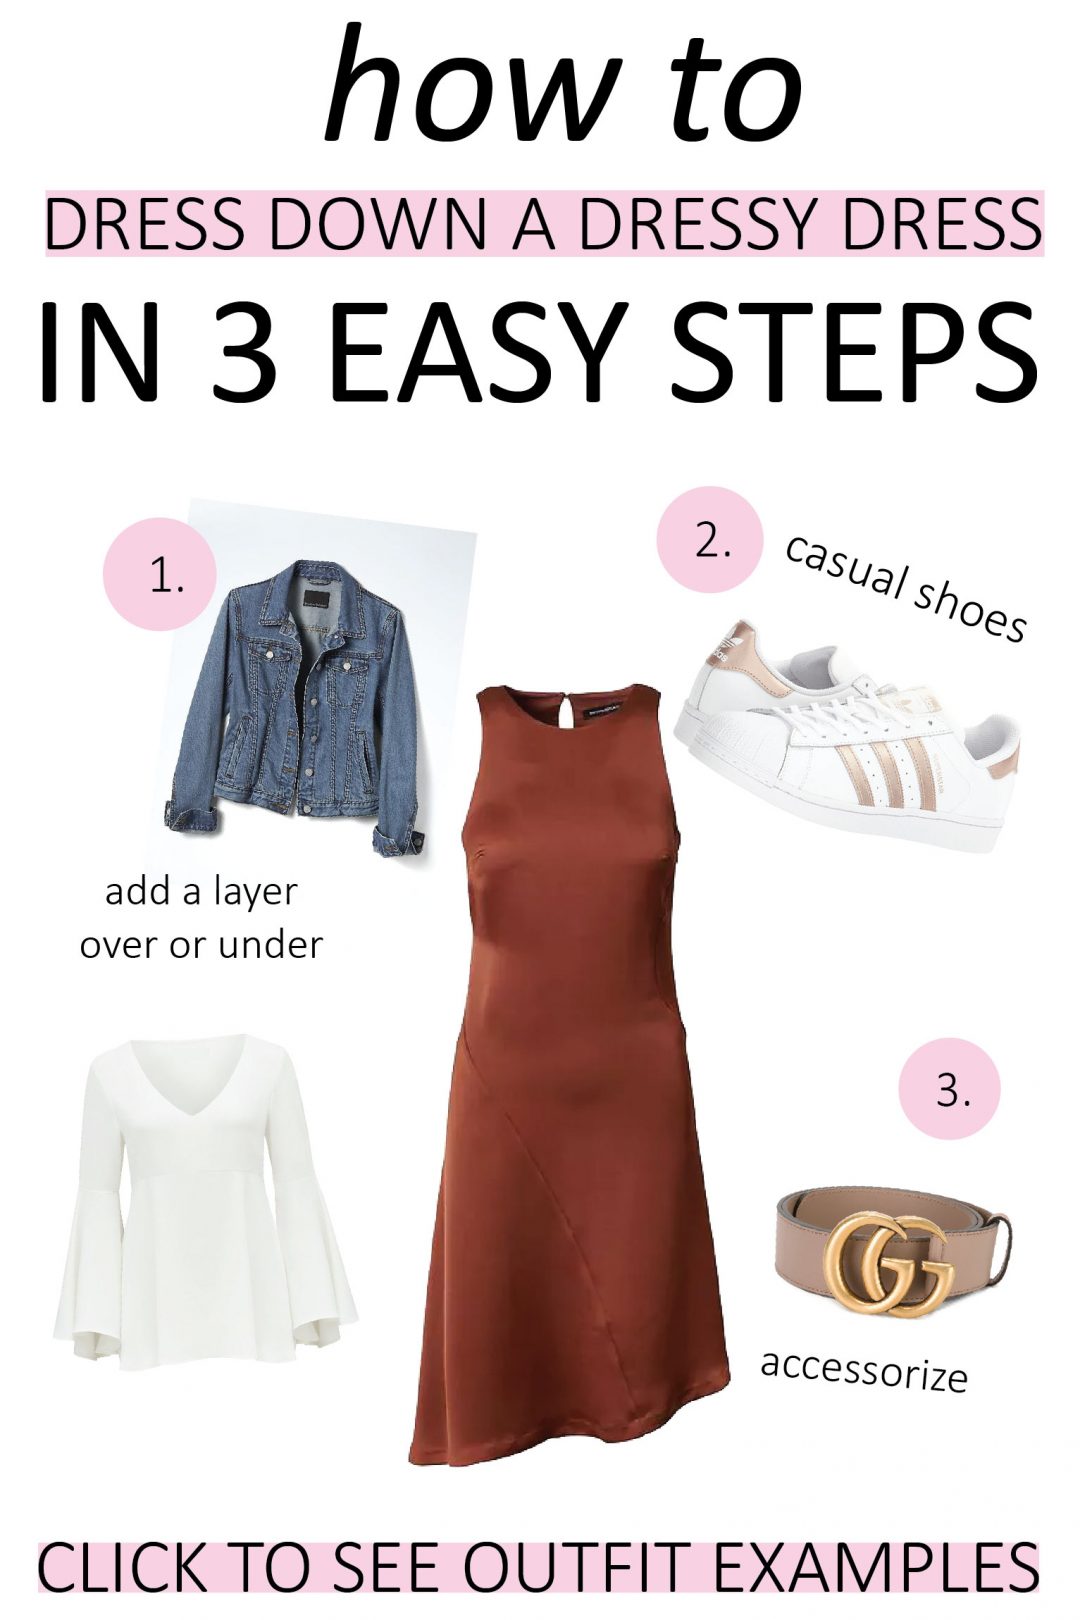 How to Dress Down a Dressy Dress - Straight A Style